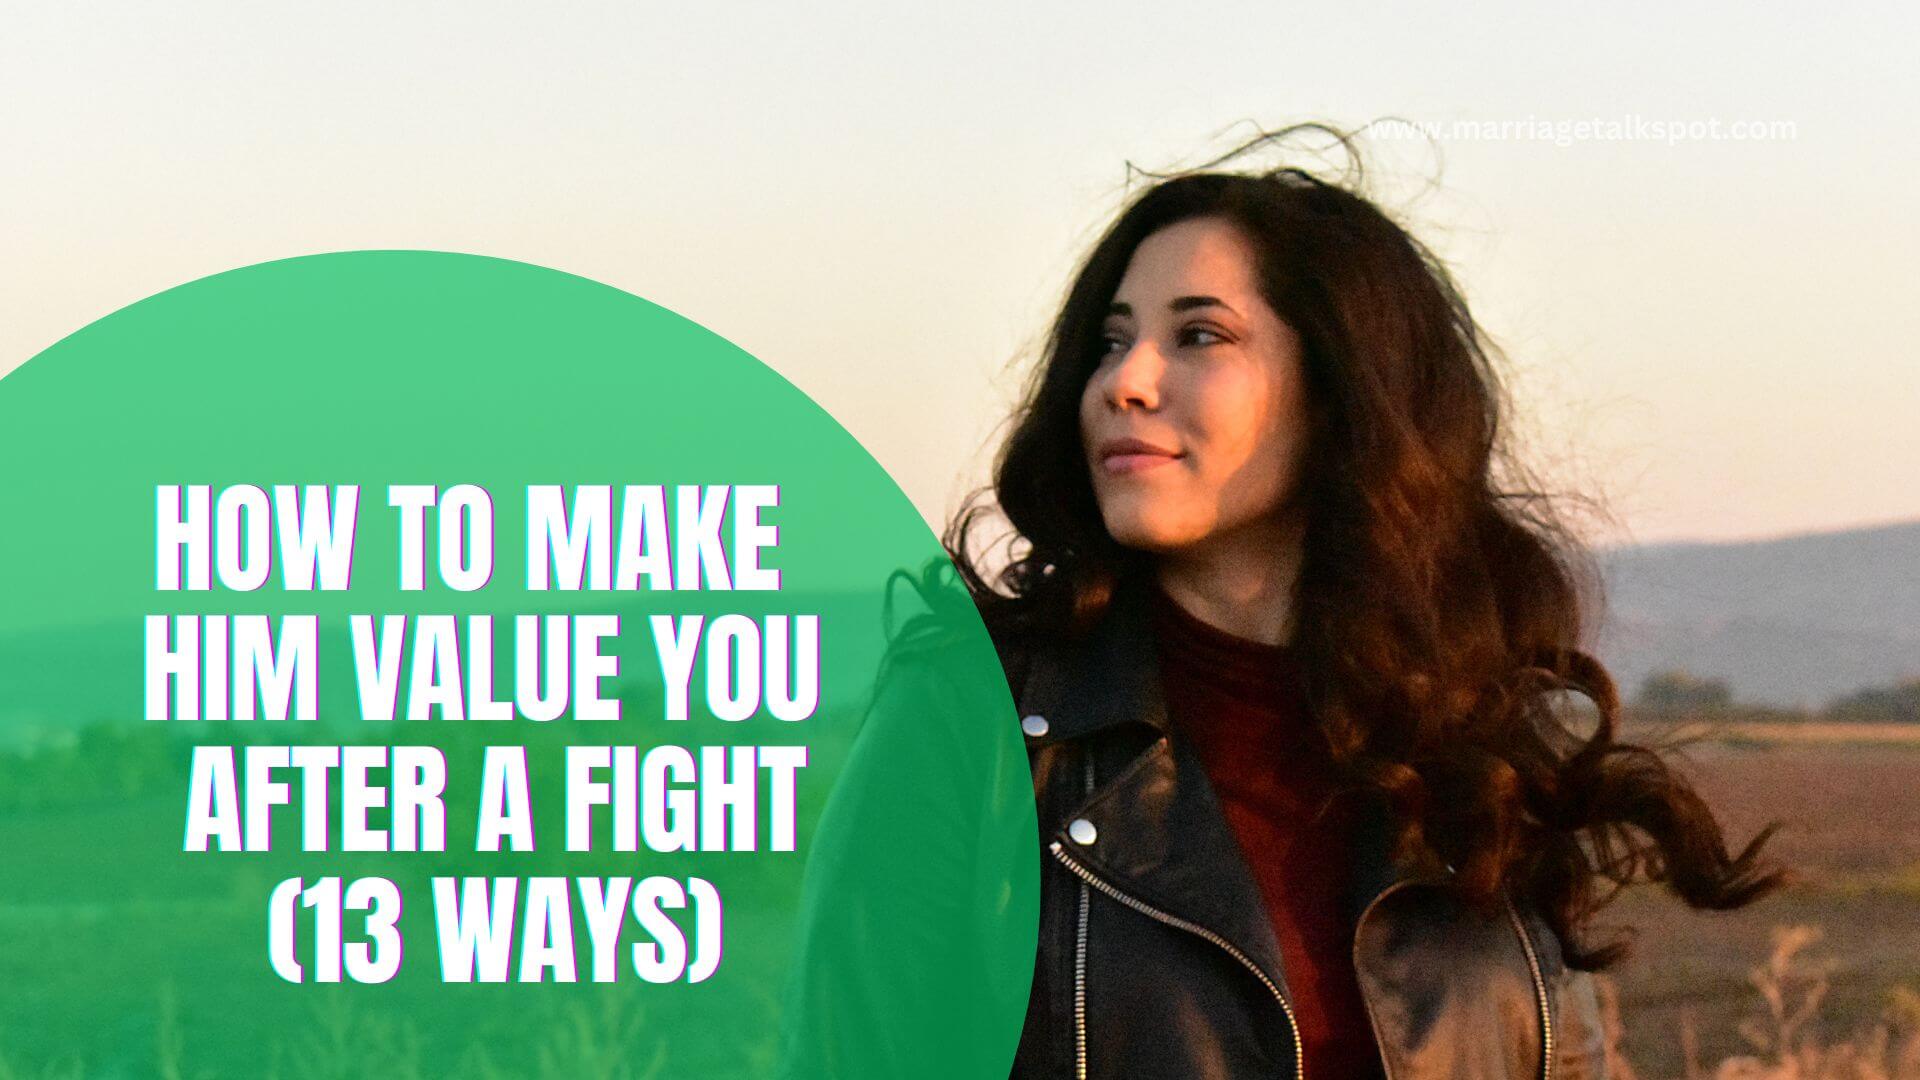 How To Make Him Value You After A Fight (13 Ways)